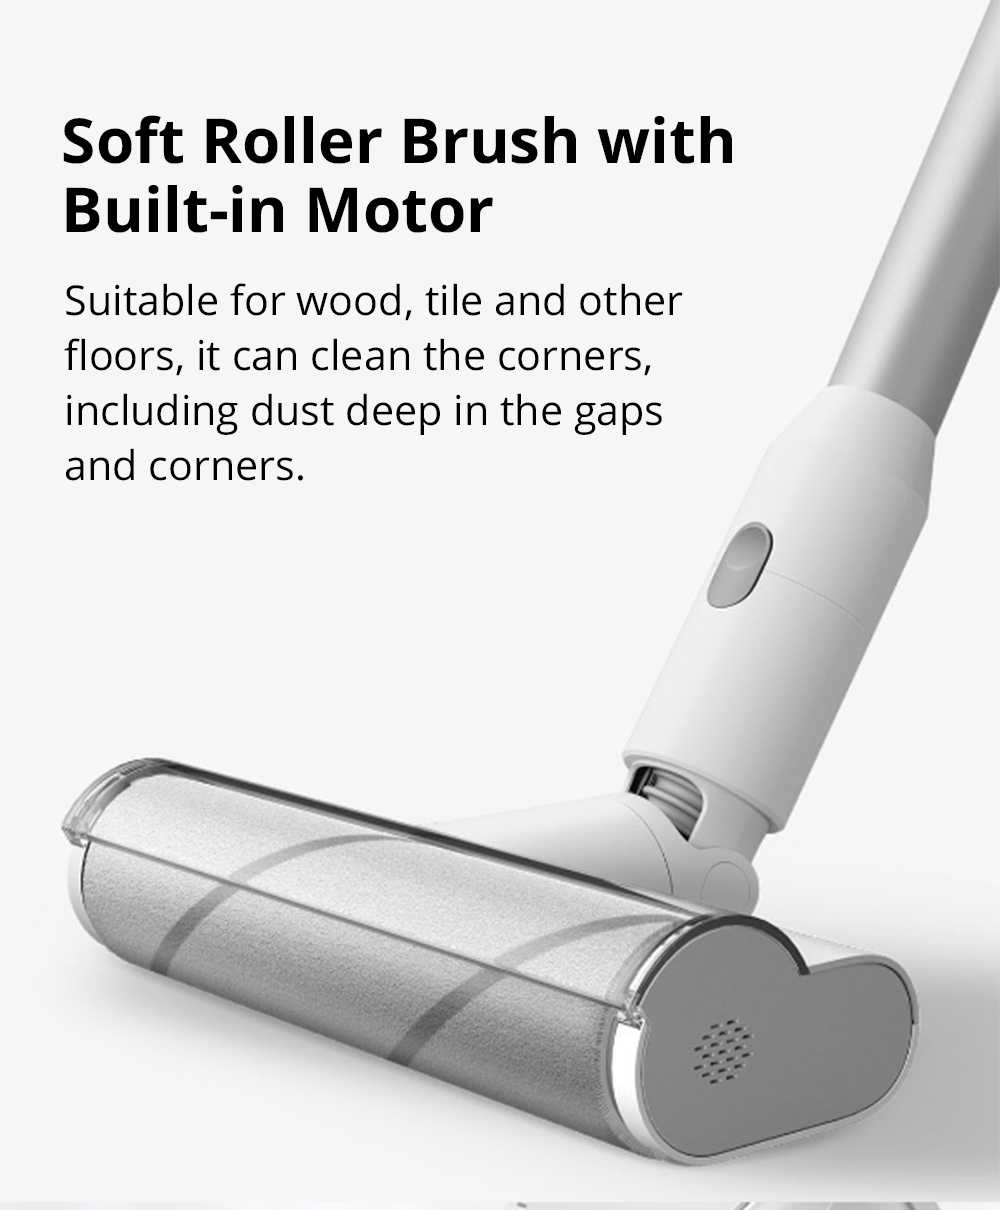 Xiaomi Mijia Handheld Cordless Powerful Vacuum Cleaner 23000 PA Suction Anti-winding Hair Mite Cleaning Global Version - White